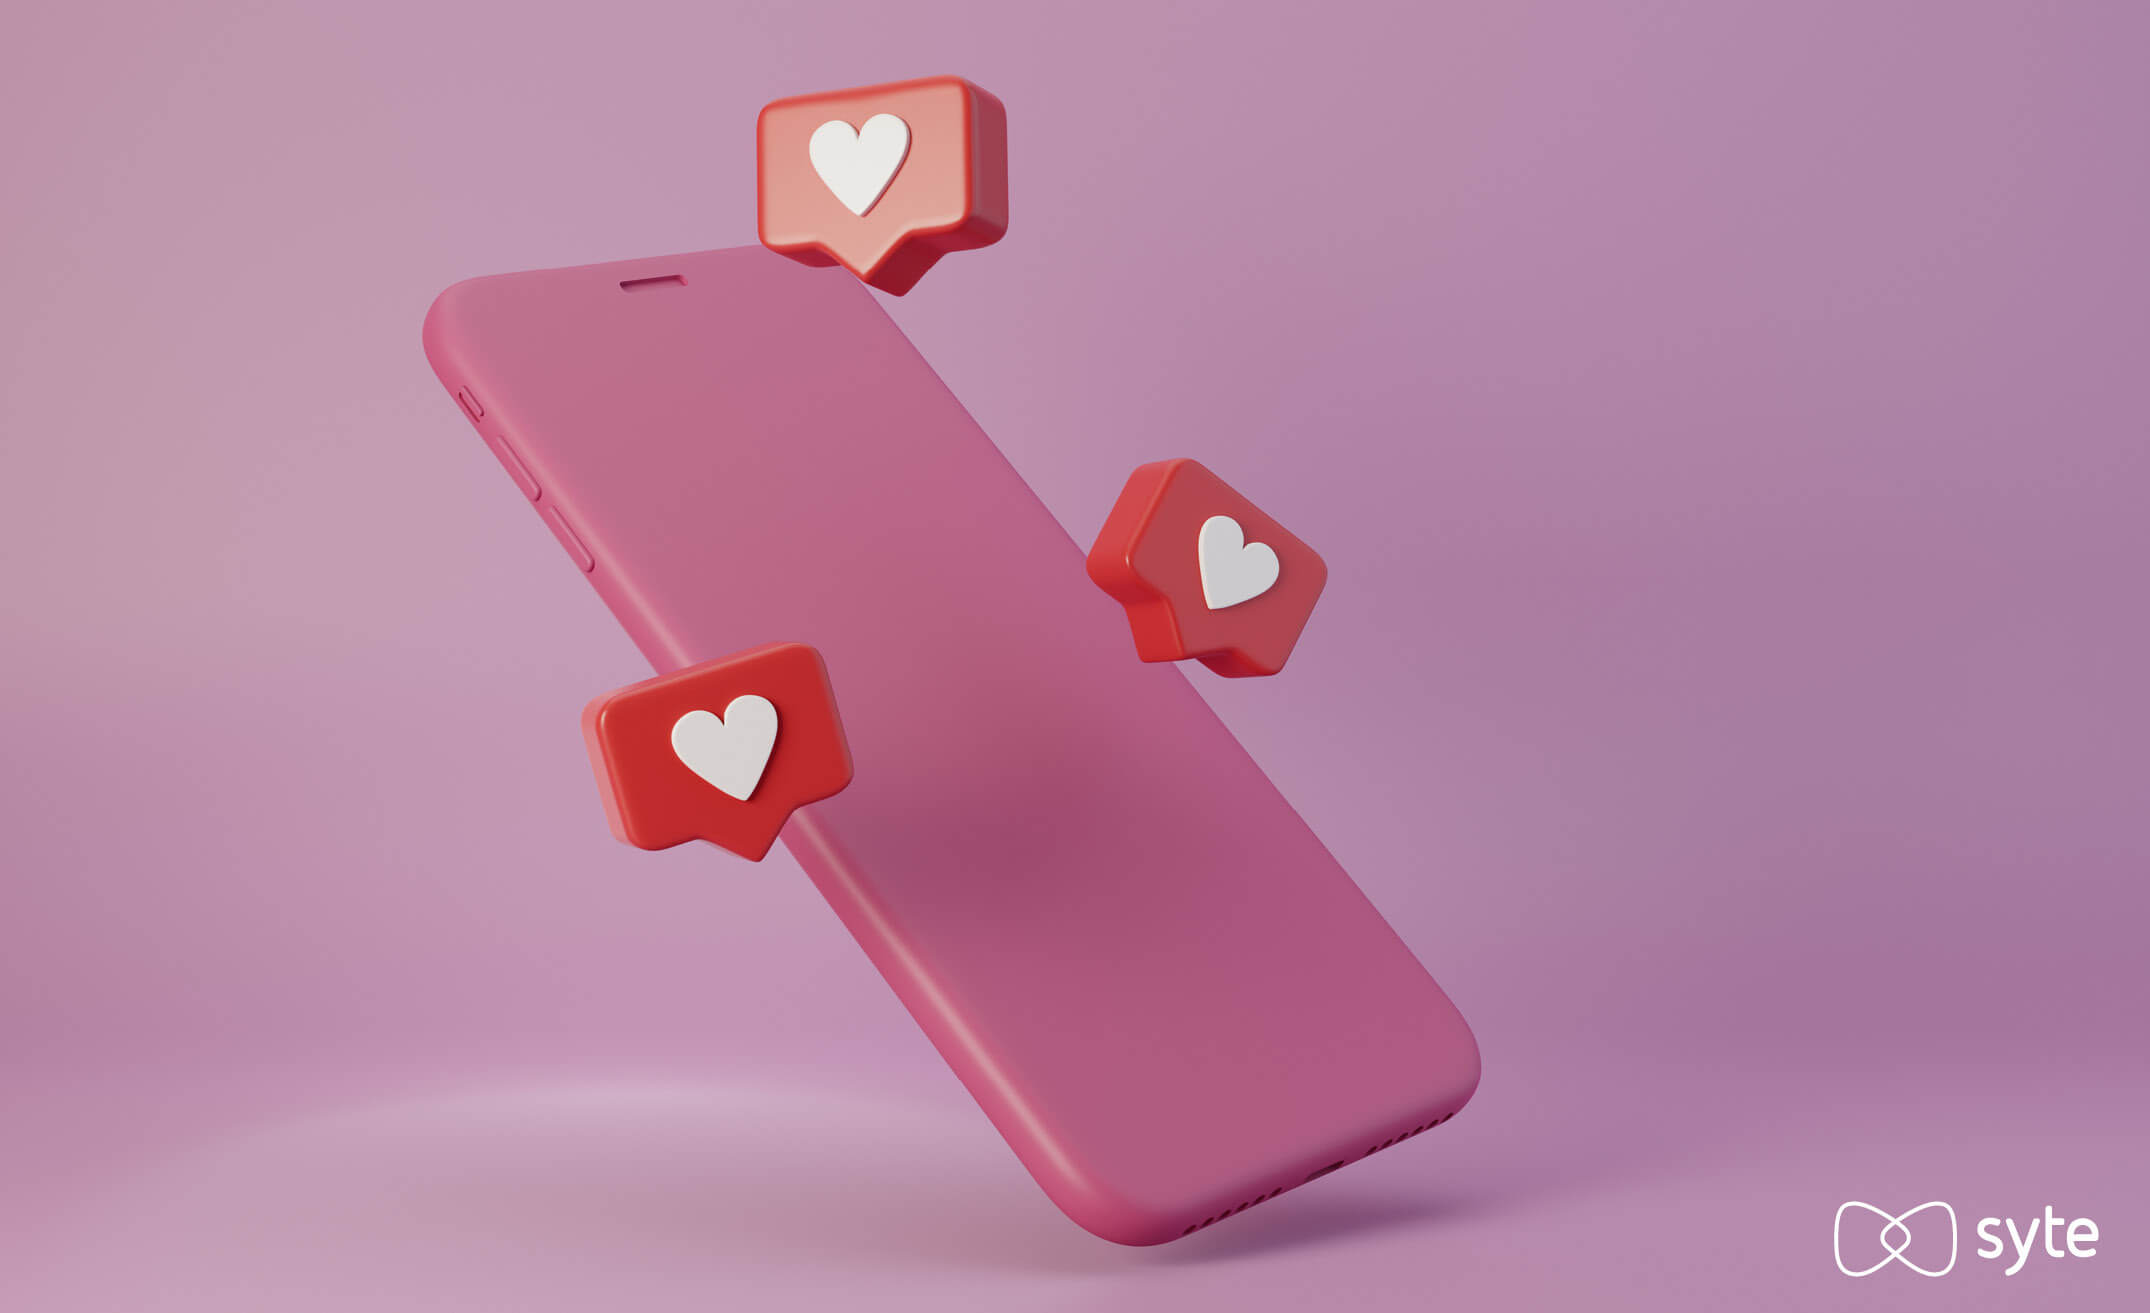 A pink phone surrounded by hearts